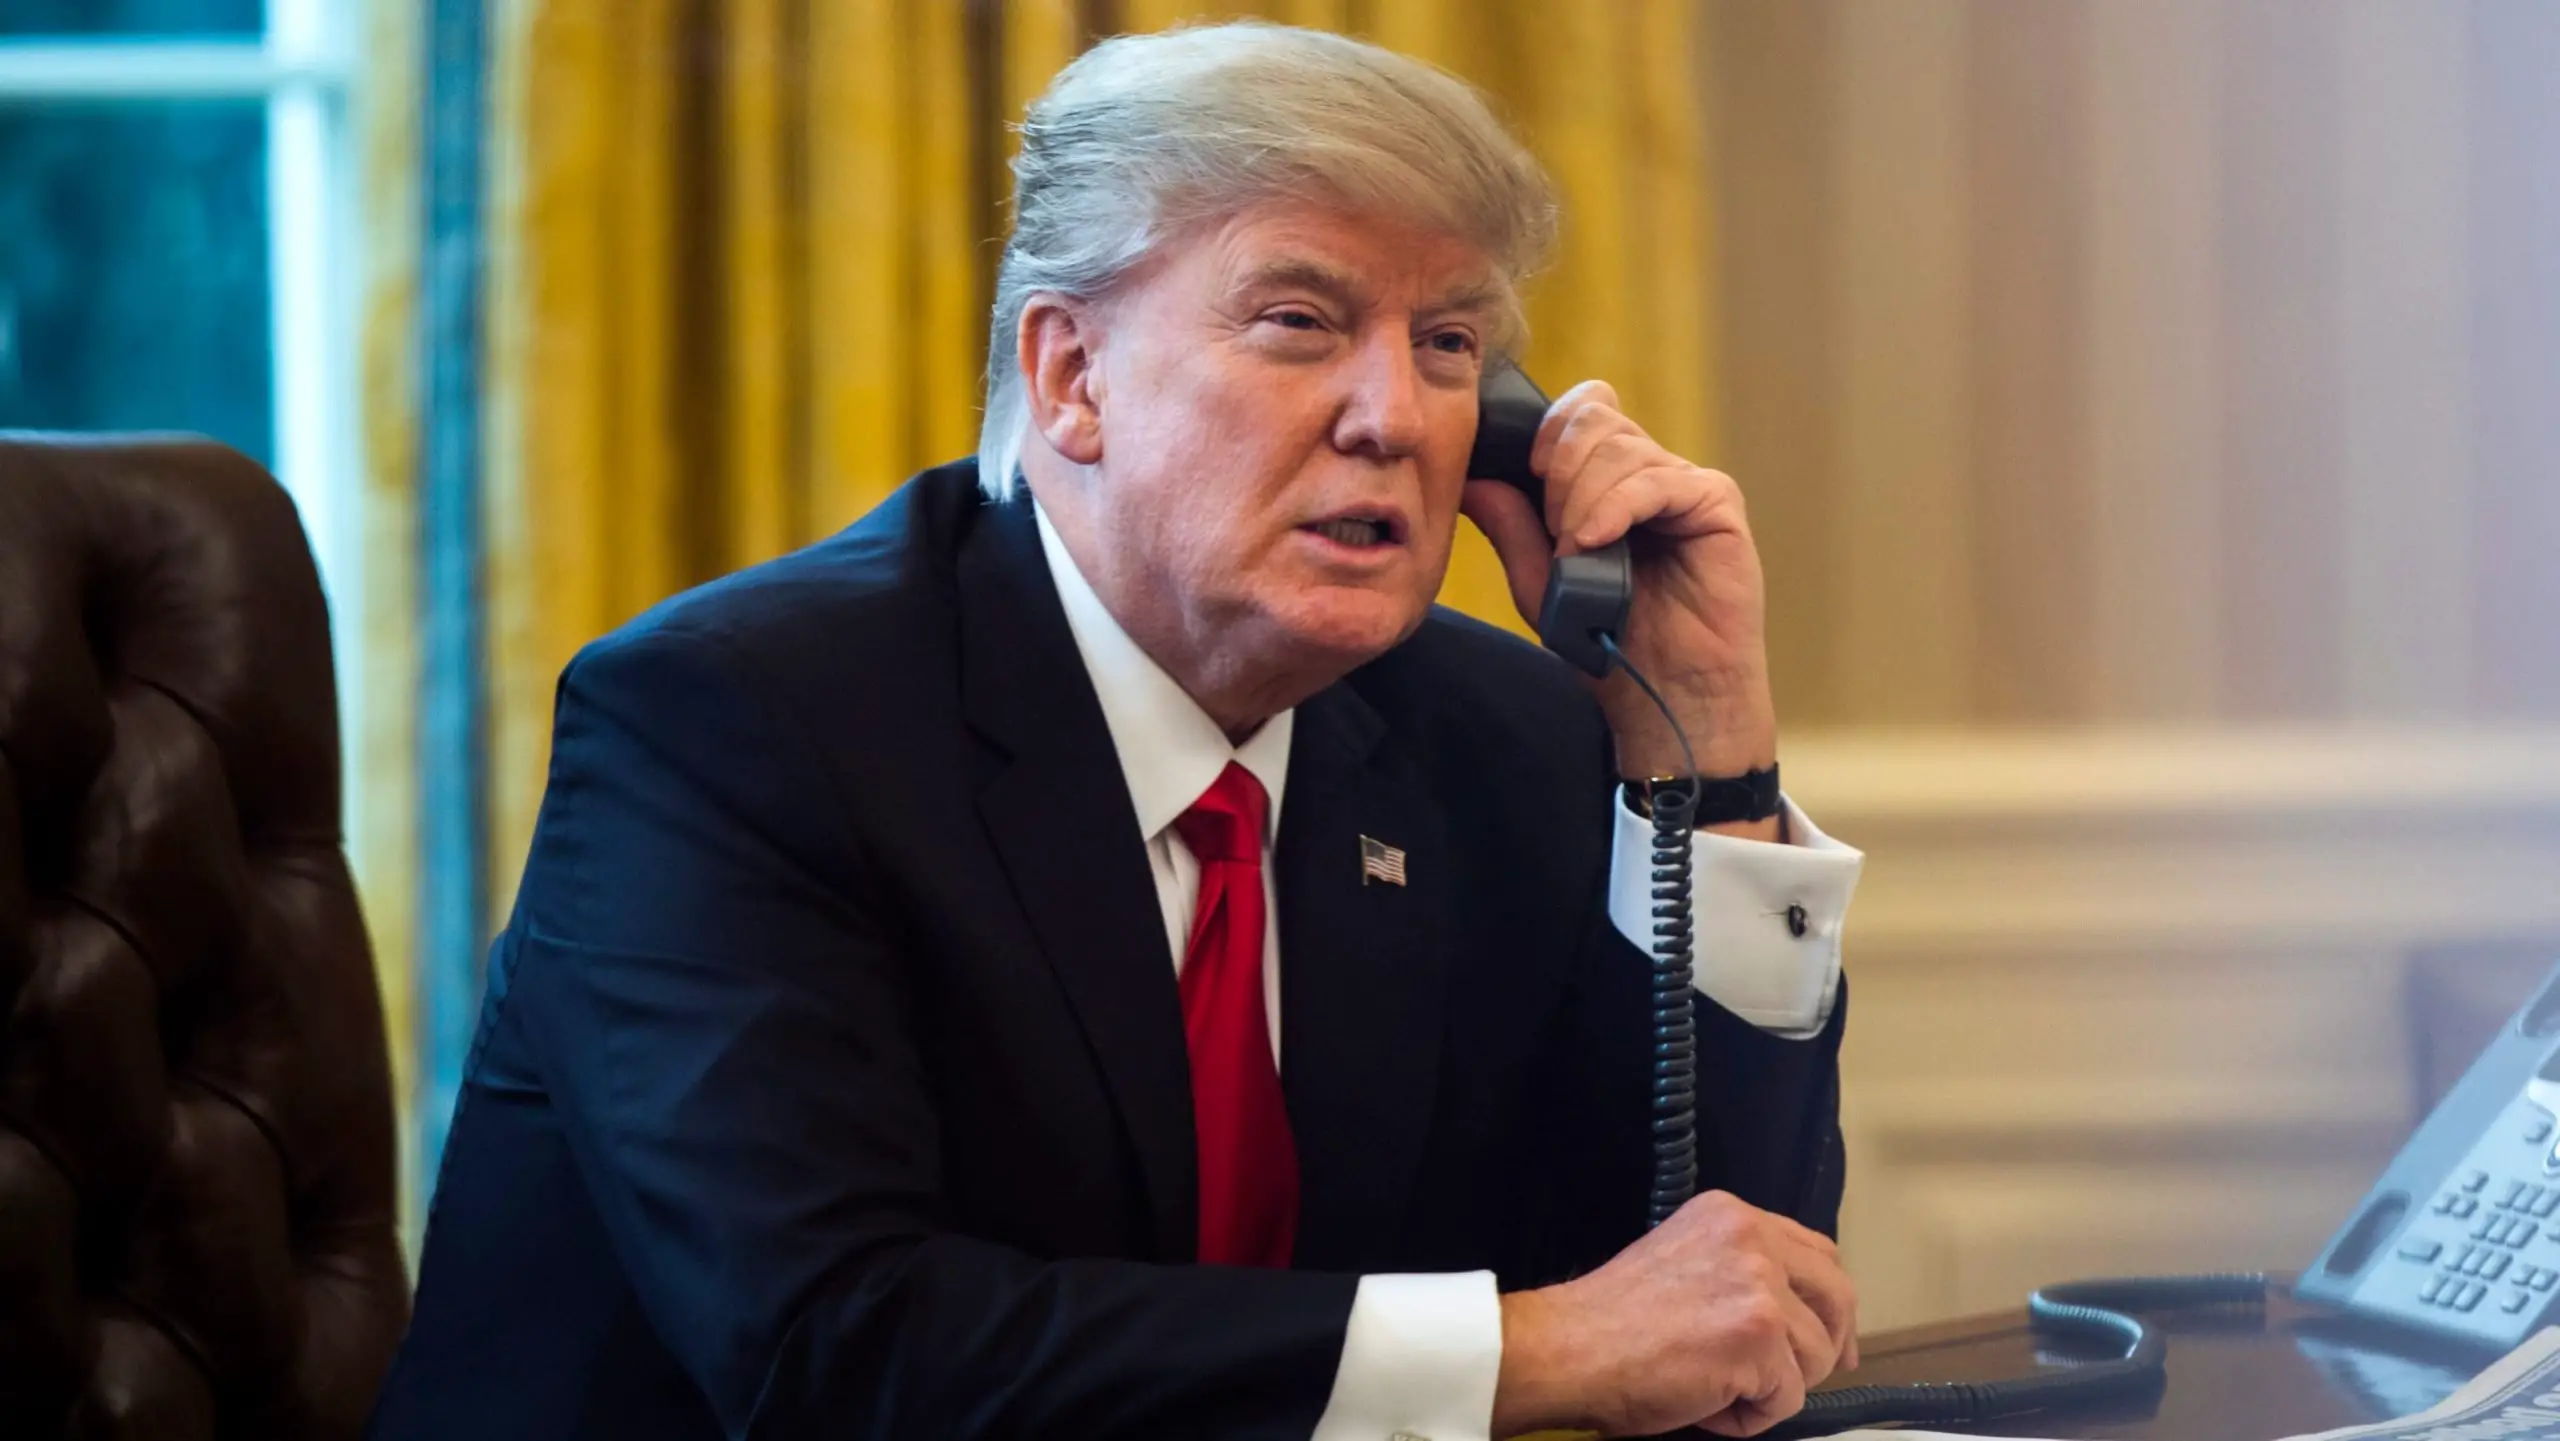 Trump, Zelensky July 25 phone call: What the summary says